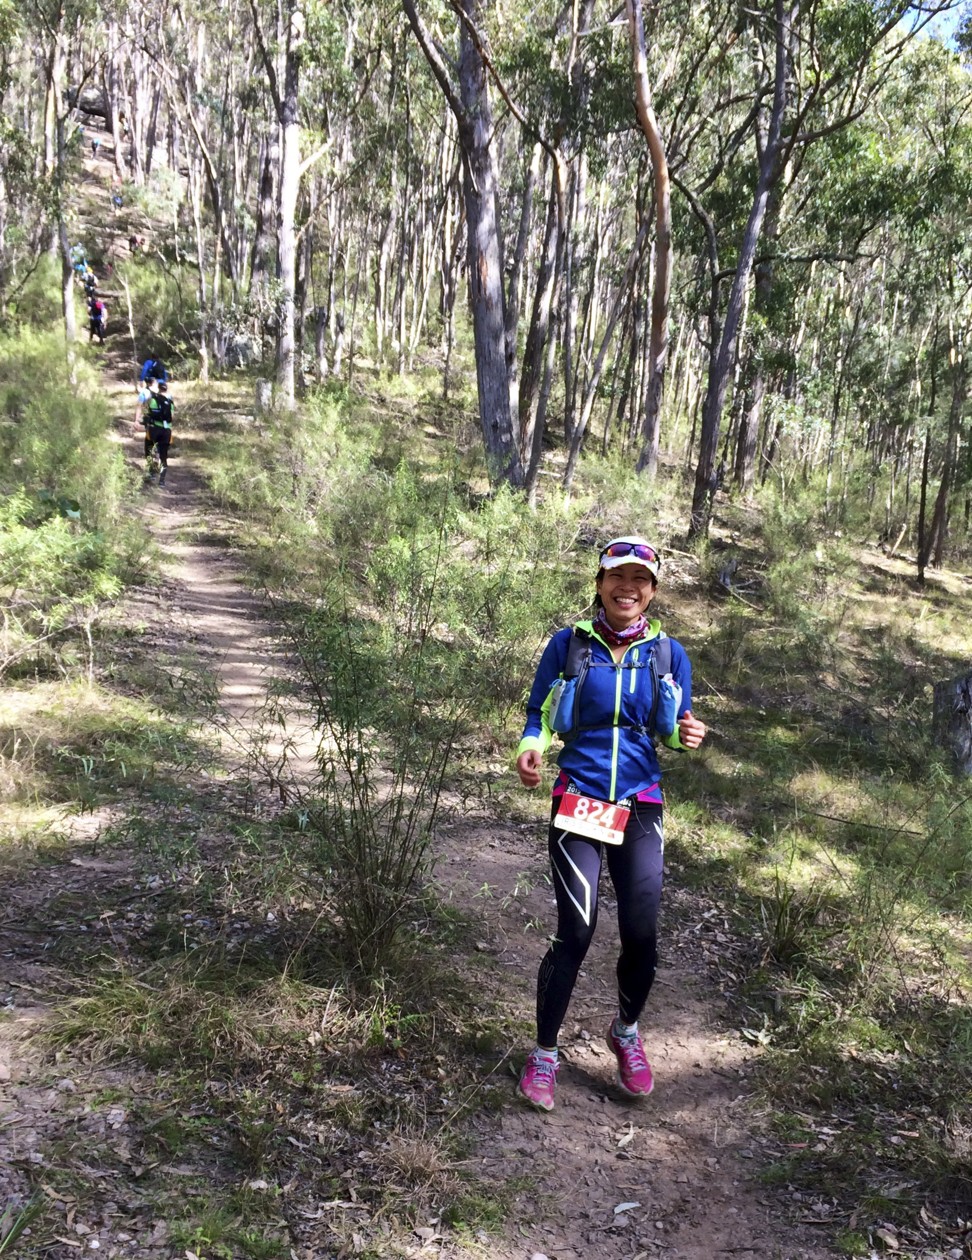 Mak during The North Face 100, a 100km race through Australia’s Blue Mountains National Park, in 2015.